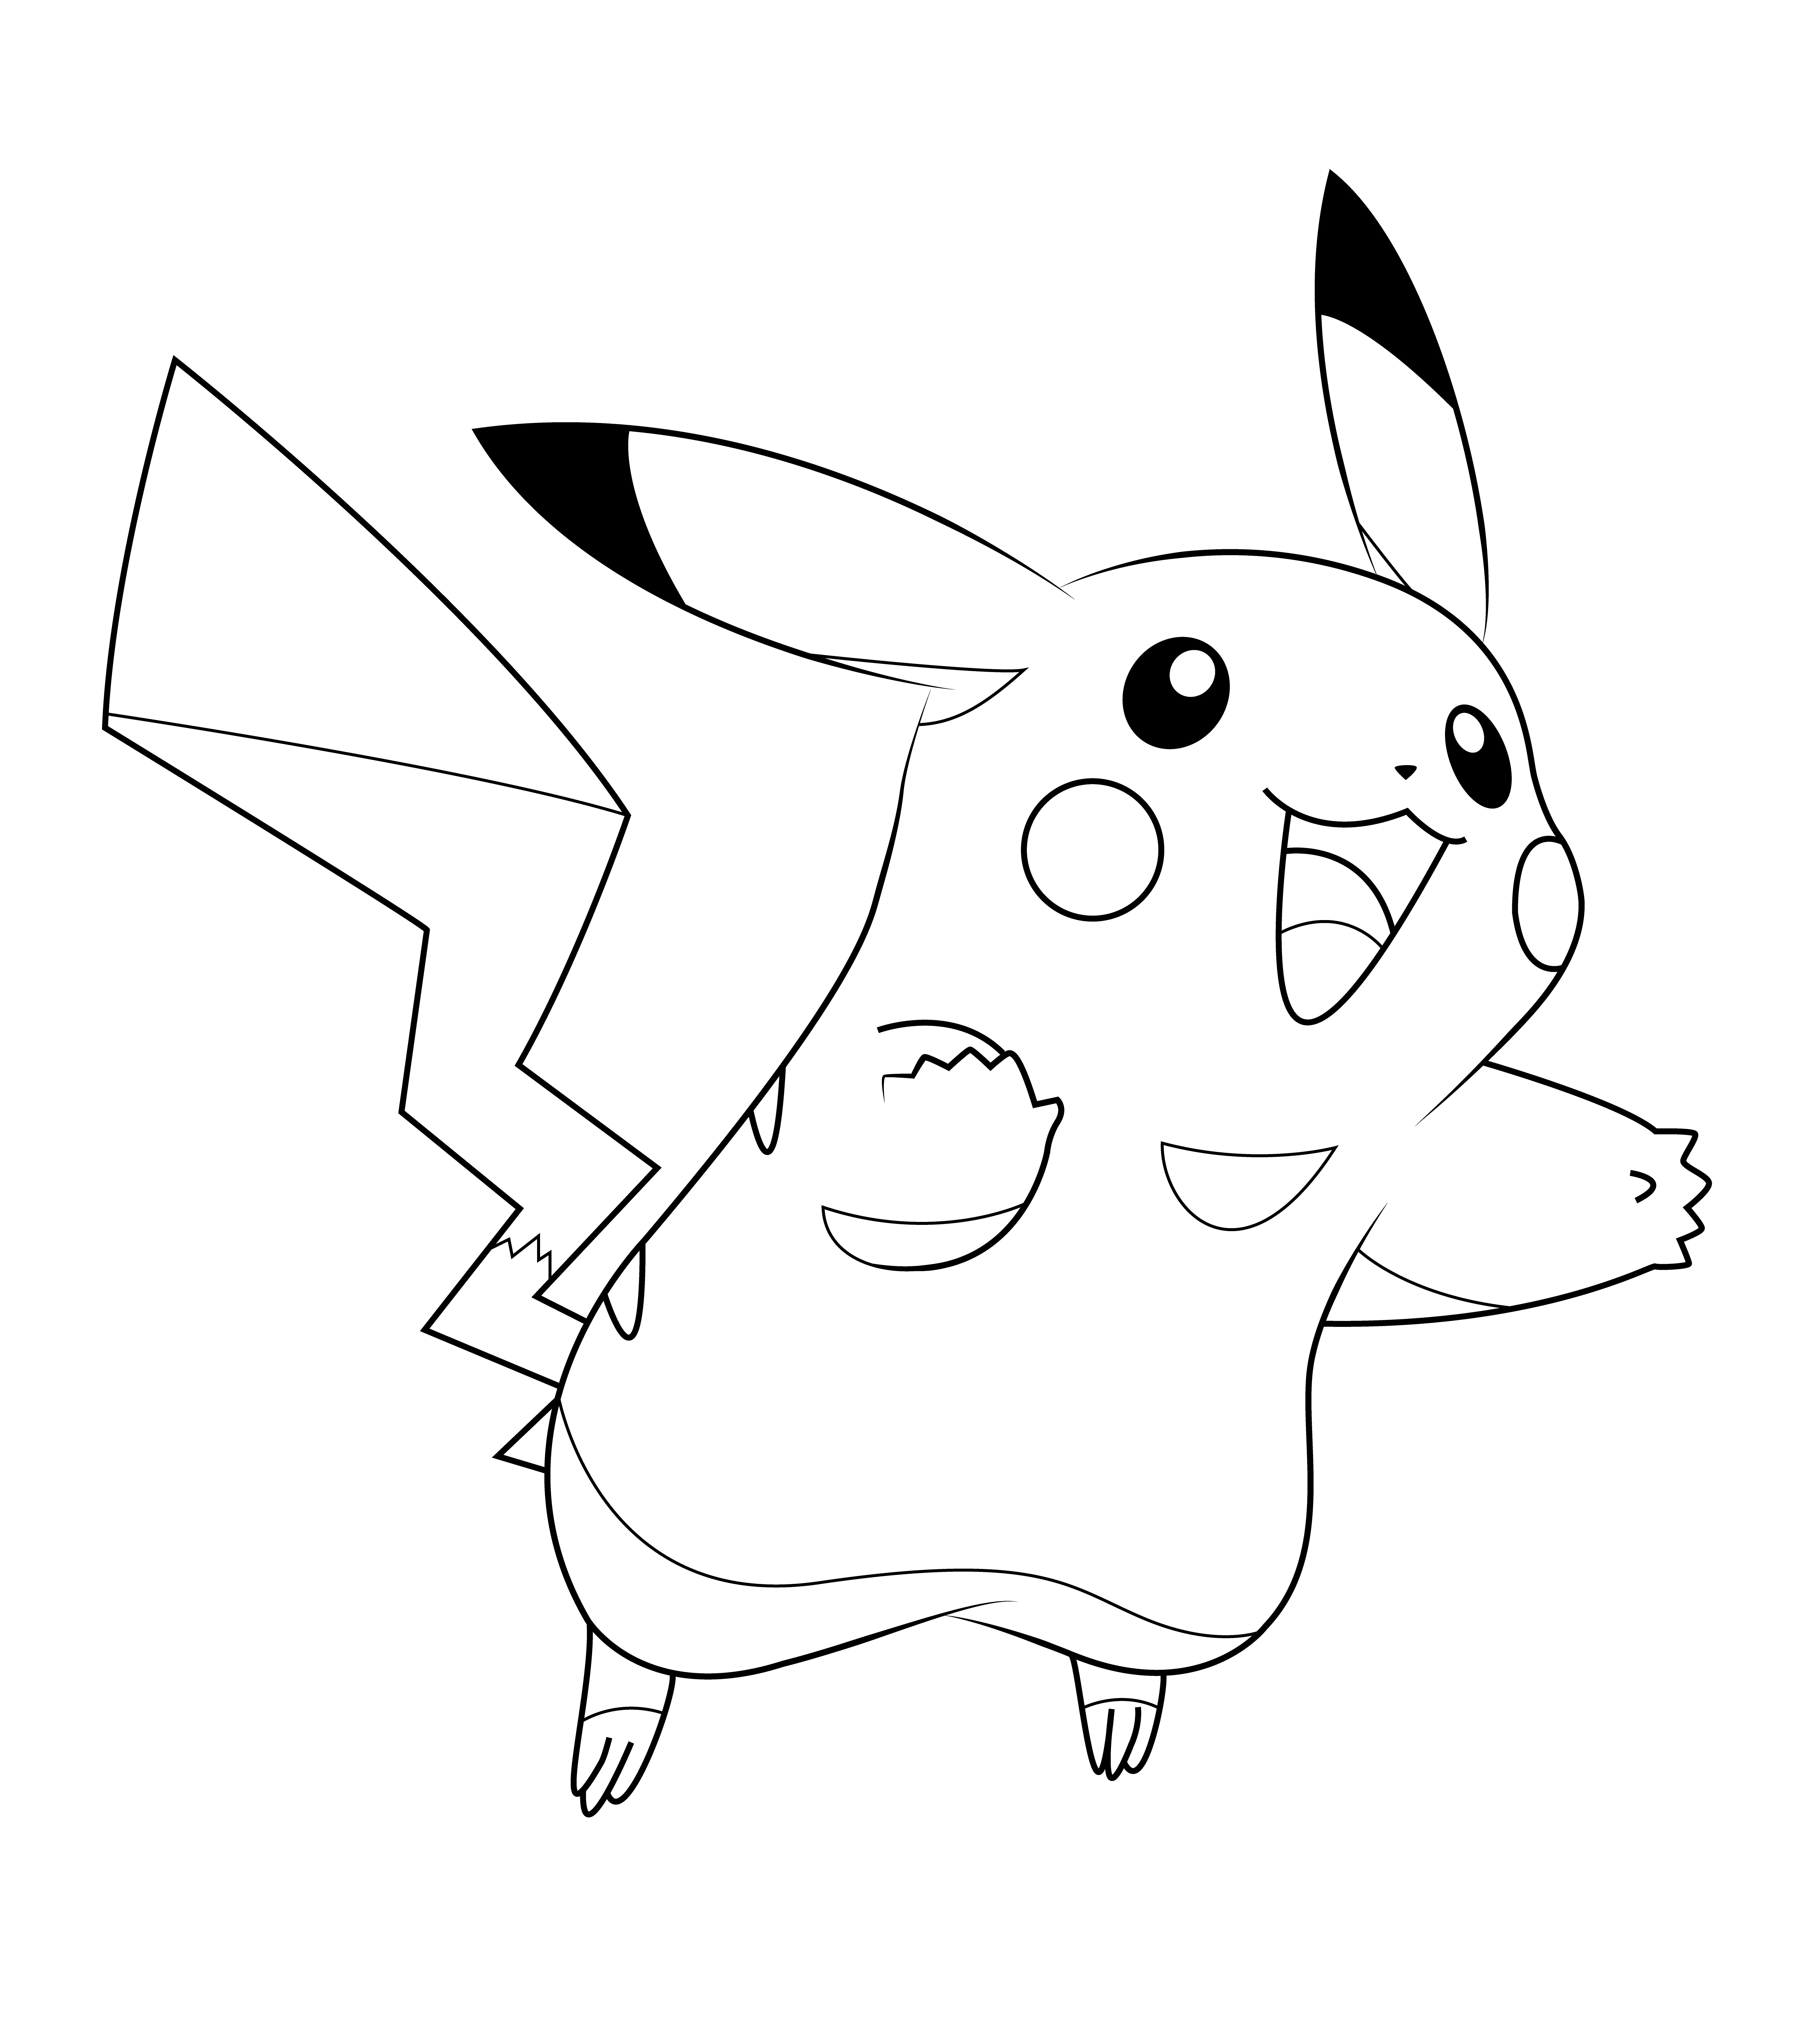 Girl Pikachu Coloring Pages
 Pickachu Outline by EmmaL27 on DeviantArt